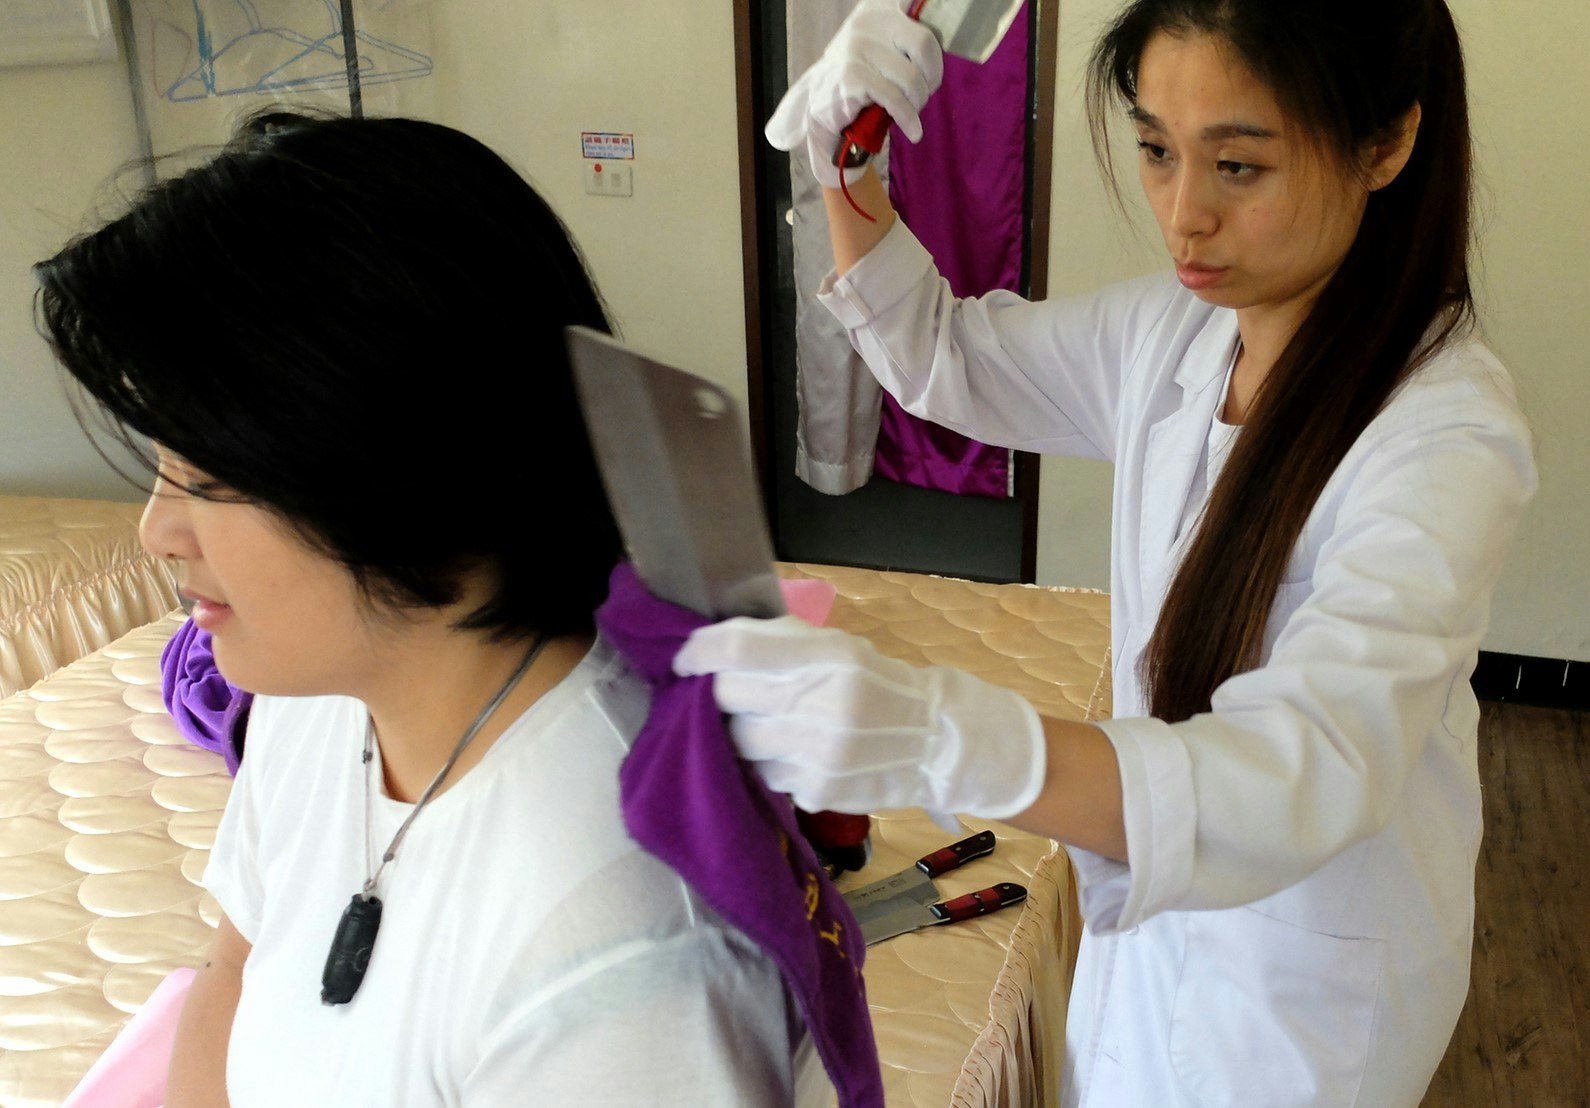 Hsiao Mei-Fang gives a knife massage to one of her students, holding one of the large knives near her shoulder and the other in mid-air. She wears a white doctor's coat with matching white gloves.